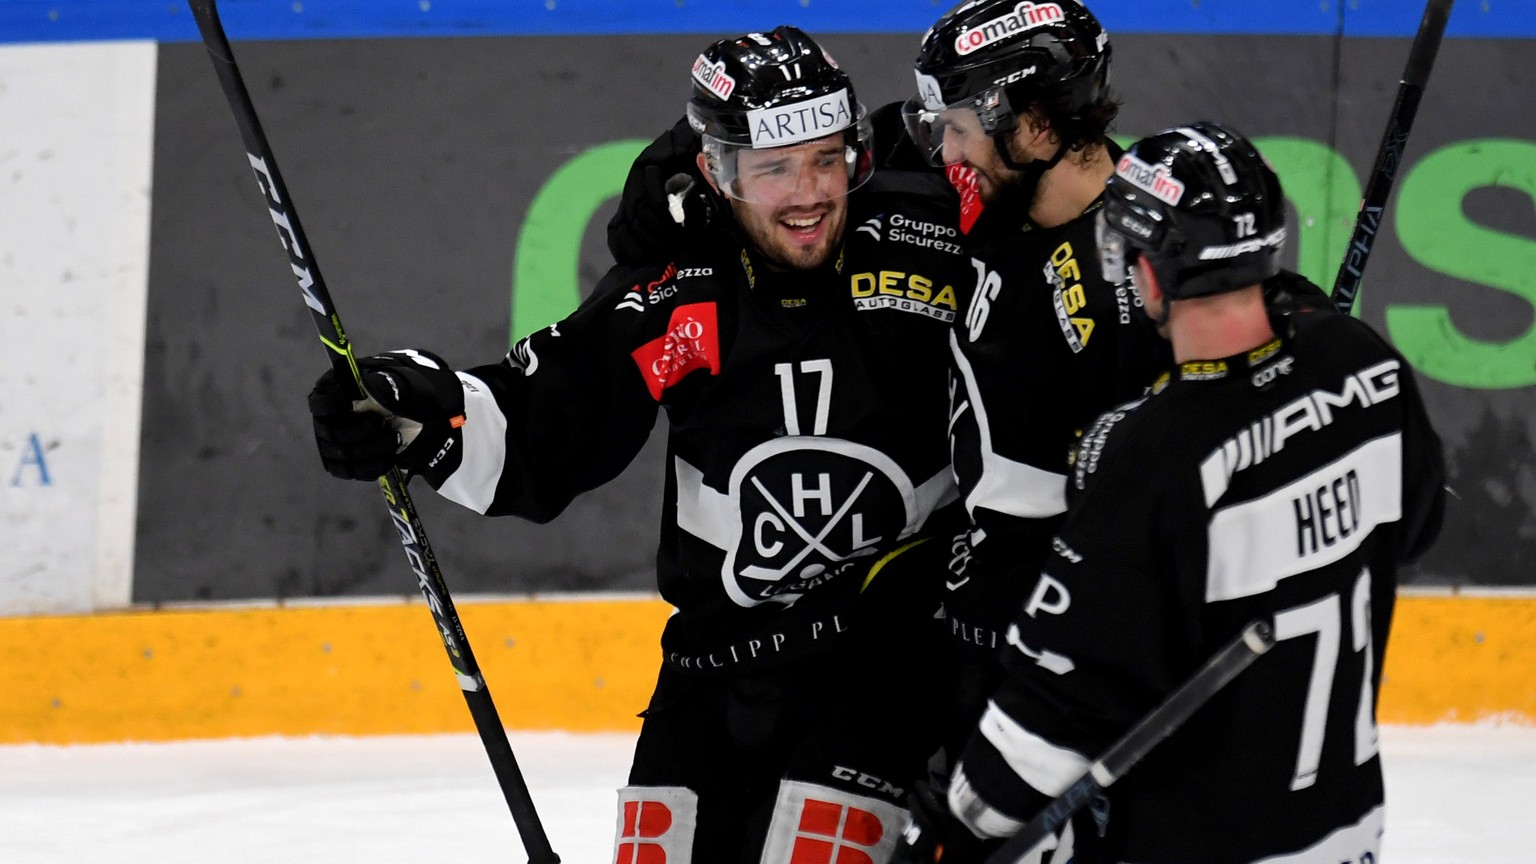 Lugano&#039;s player Luca Fazzini left celebrates the 4 - 3 goal with Team mate, during the preliminary round game of National League A (NLA) Swiss Championship 2020/21 between HC Lugano against LHC L ...